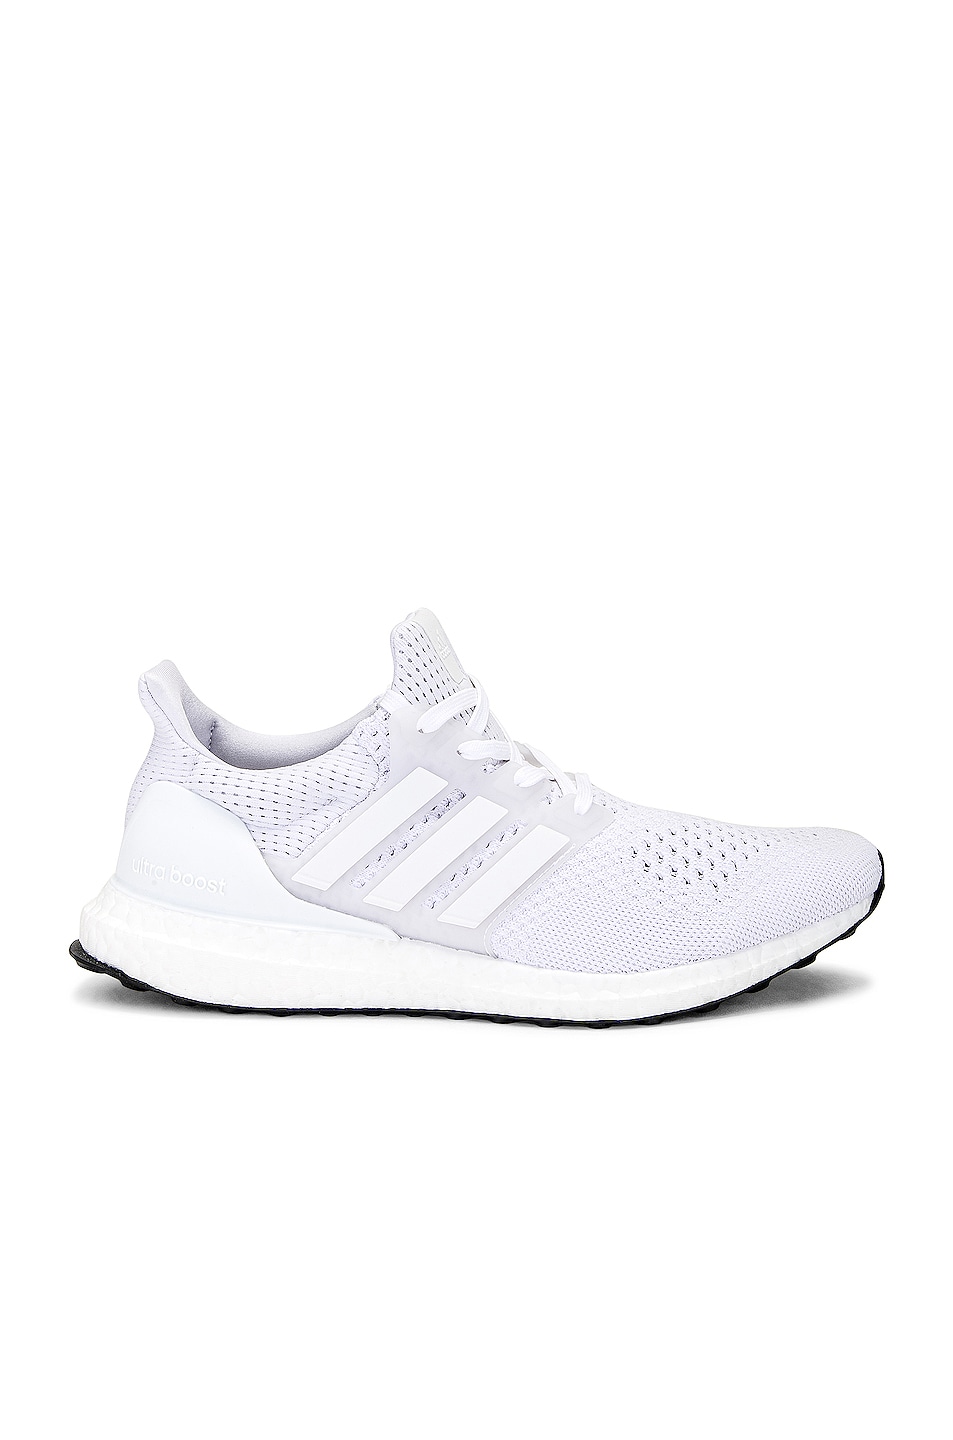 Image 1 of adidas Originals Ultraboost 1.0 Shoe in White